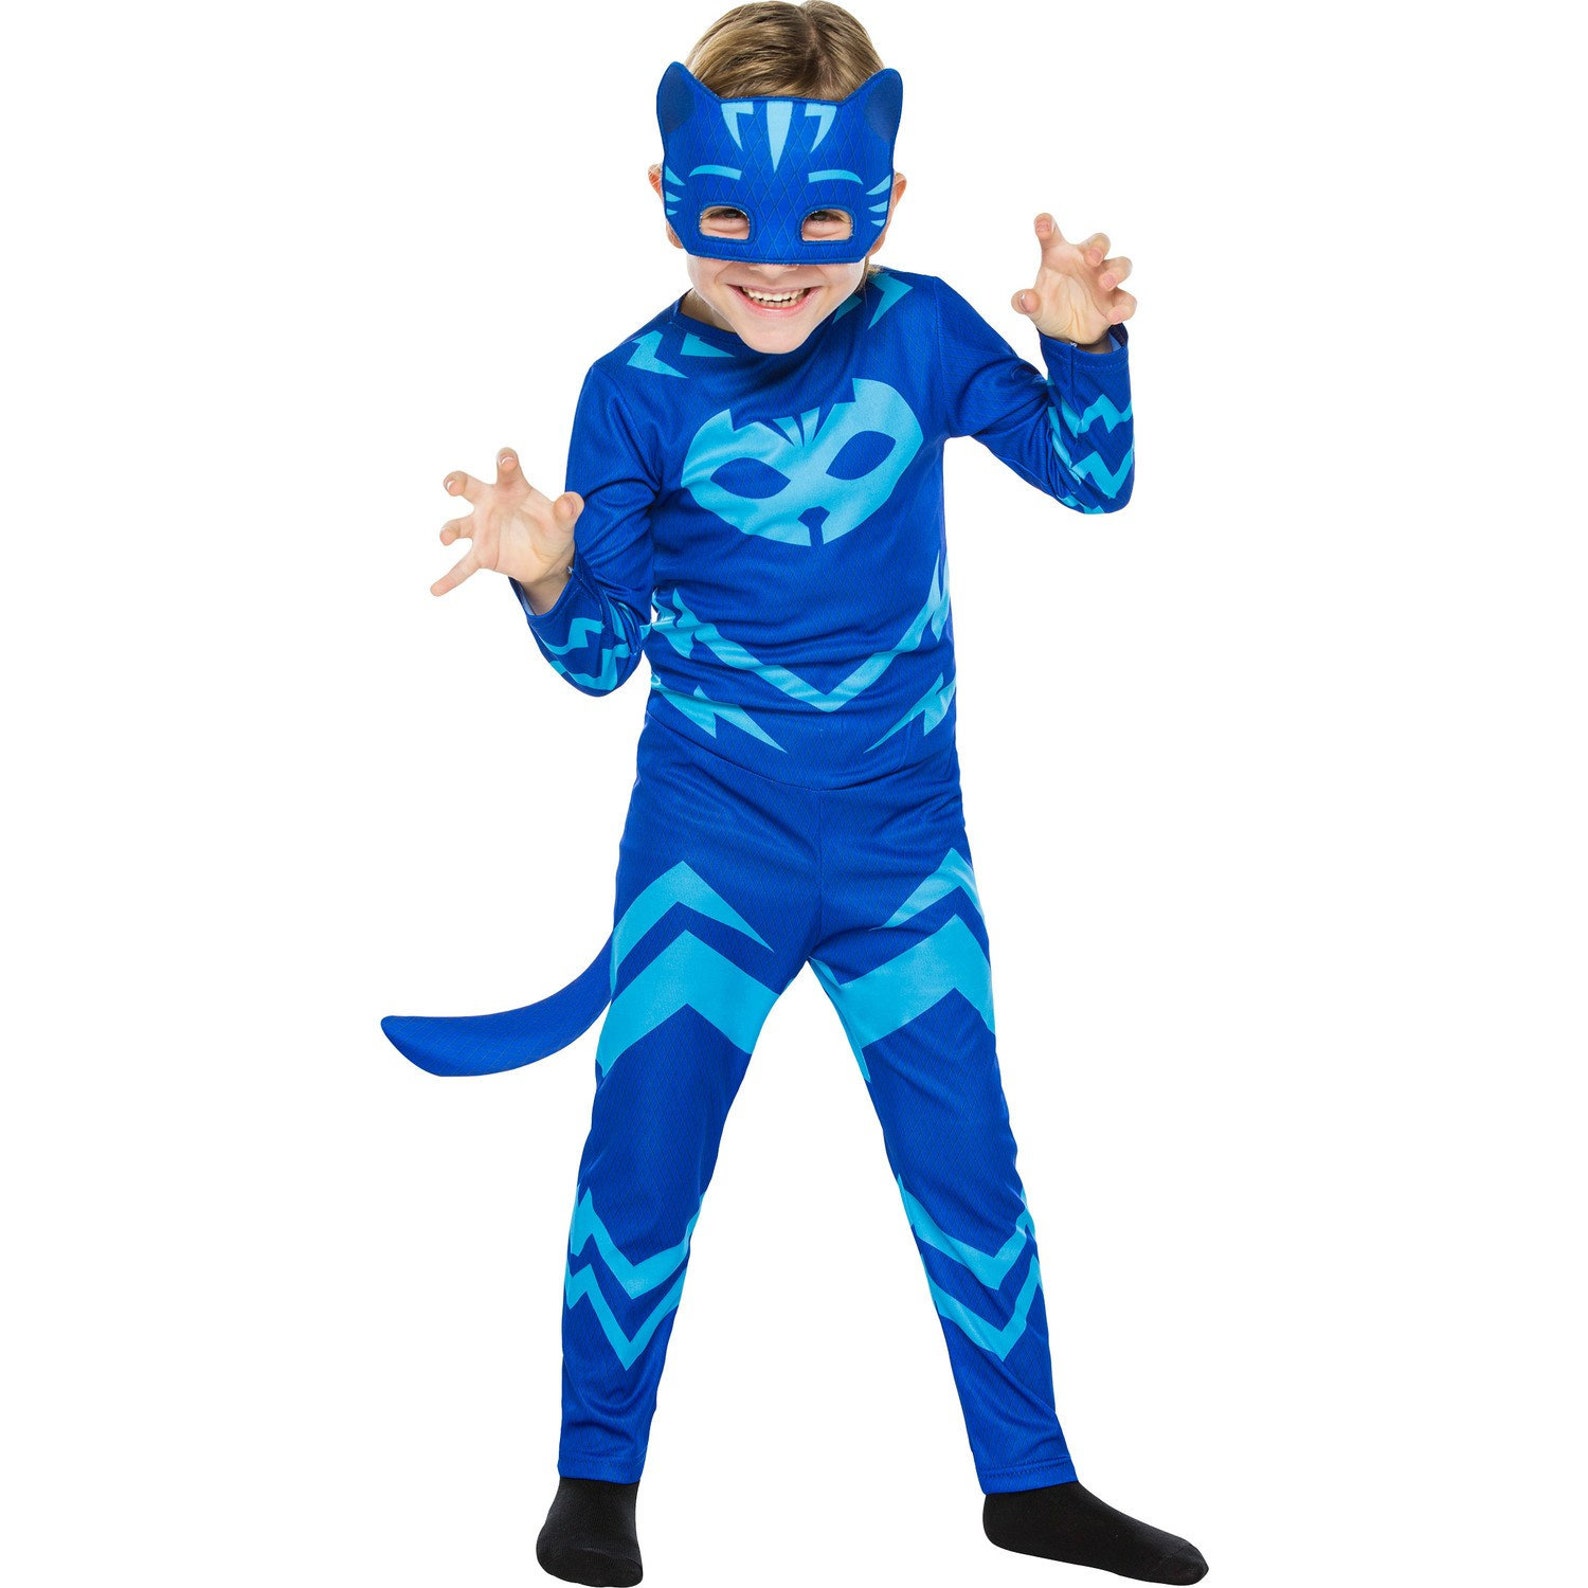 Catboy Classic Toddler PJ Masks Costume 2-8 Years Birthday Party